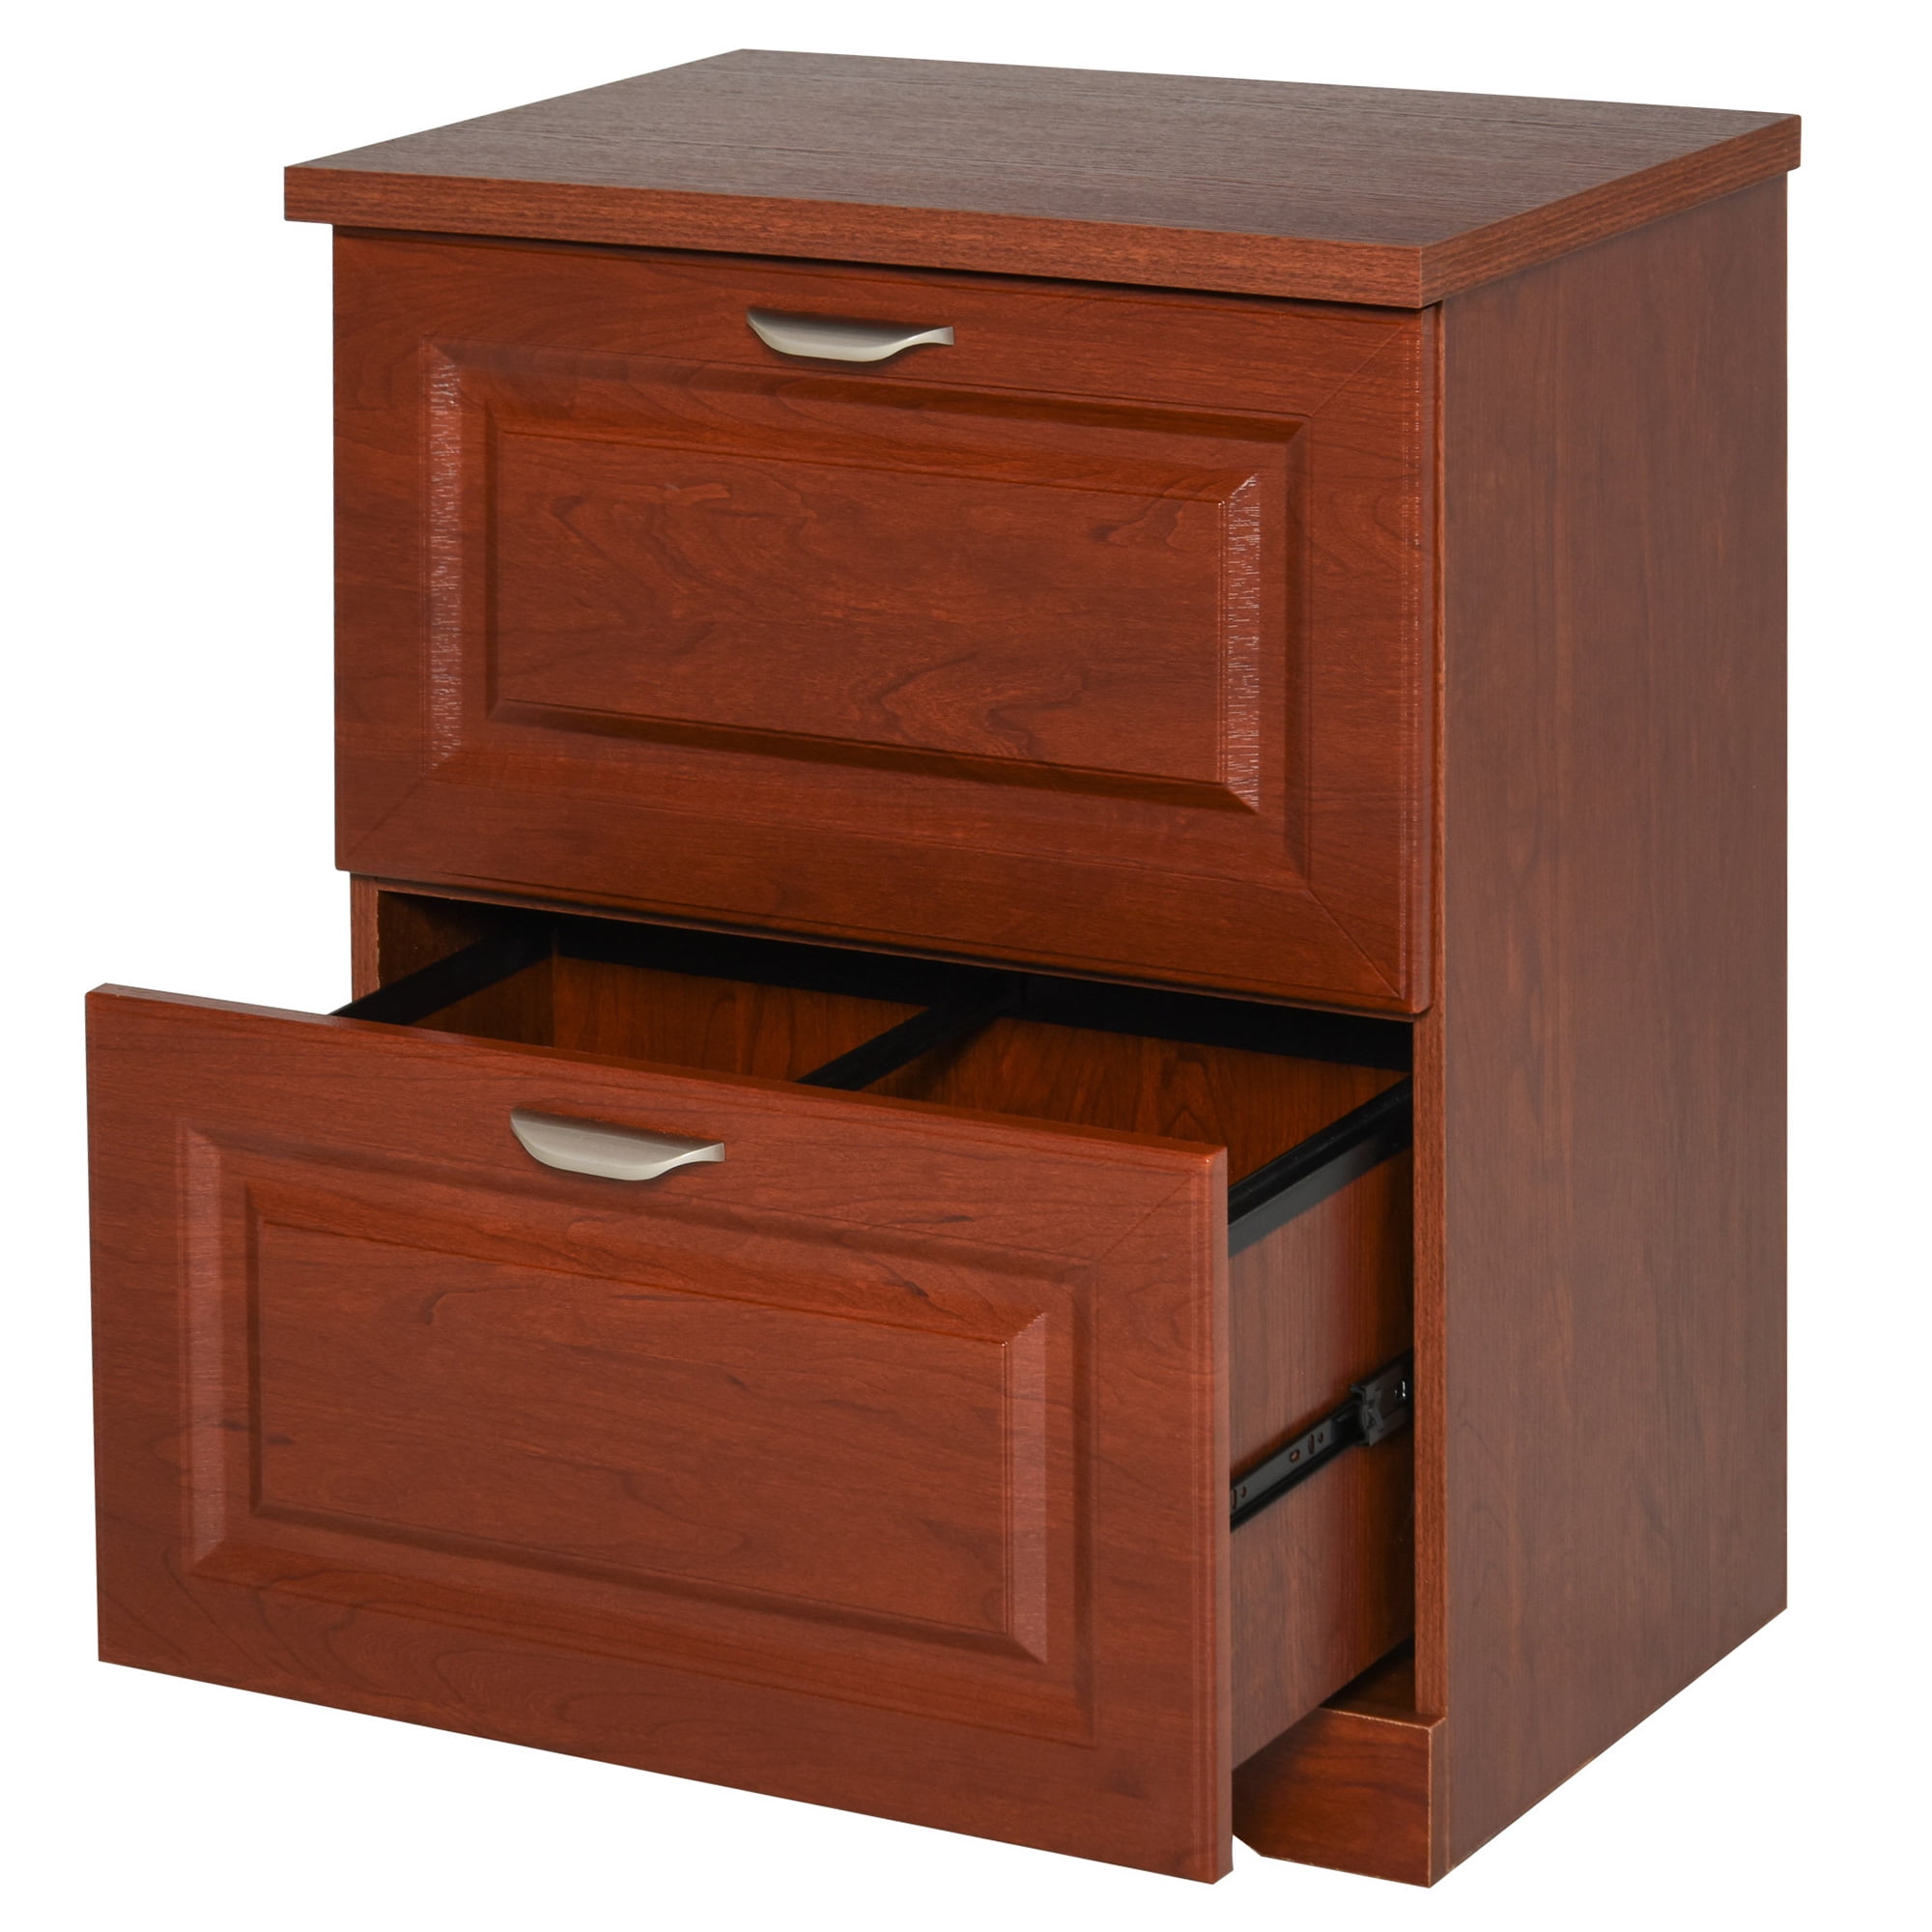 Homcom Wood 2 Drawer Lateral File, Office Depot 5 Drawer Lateral File Cabinet